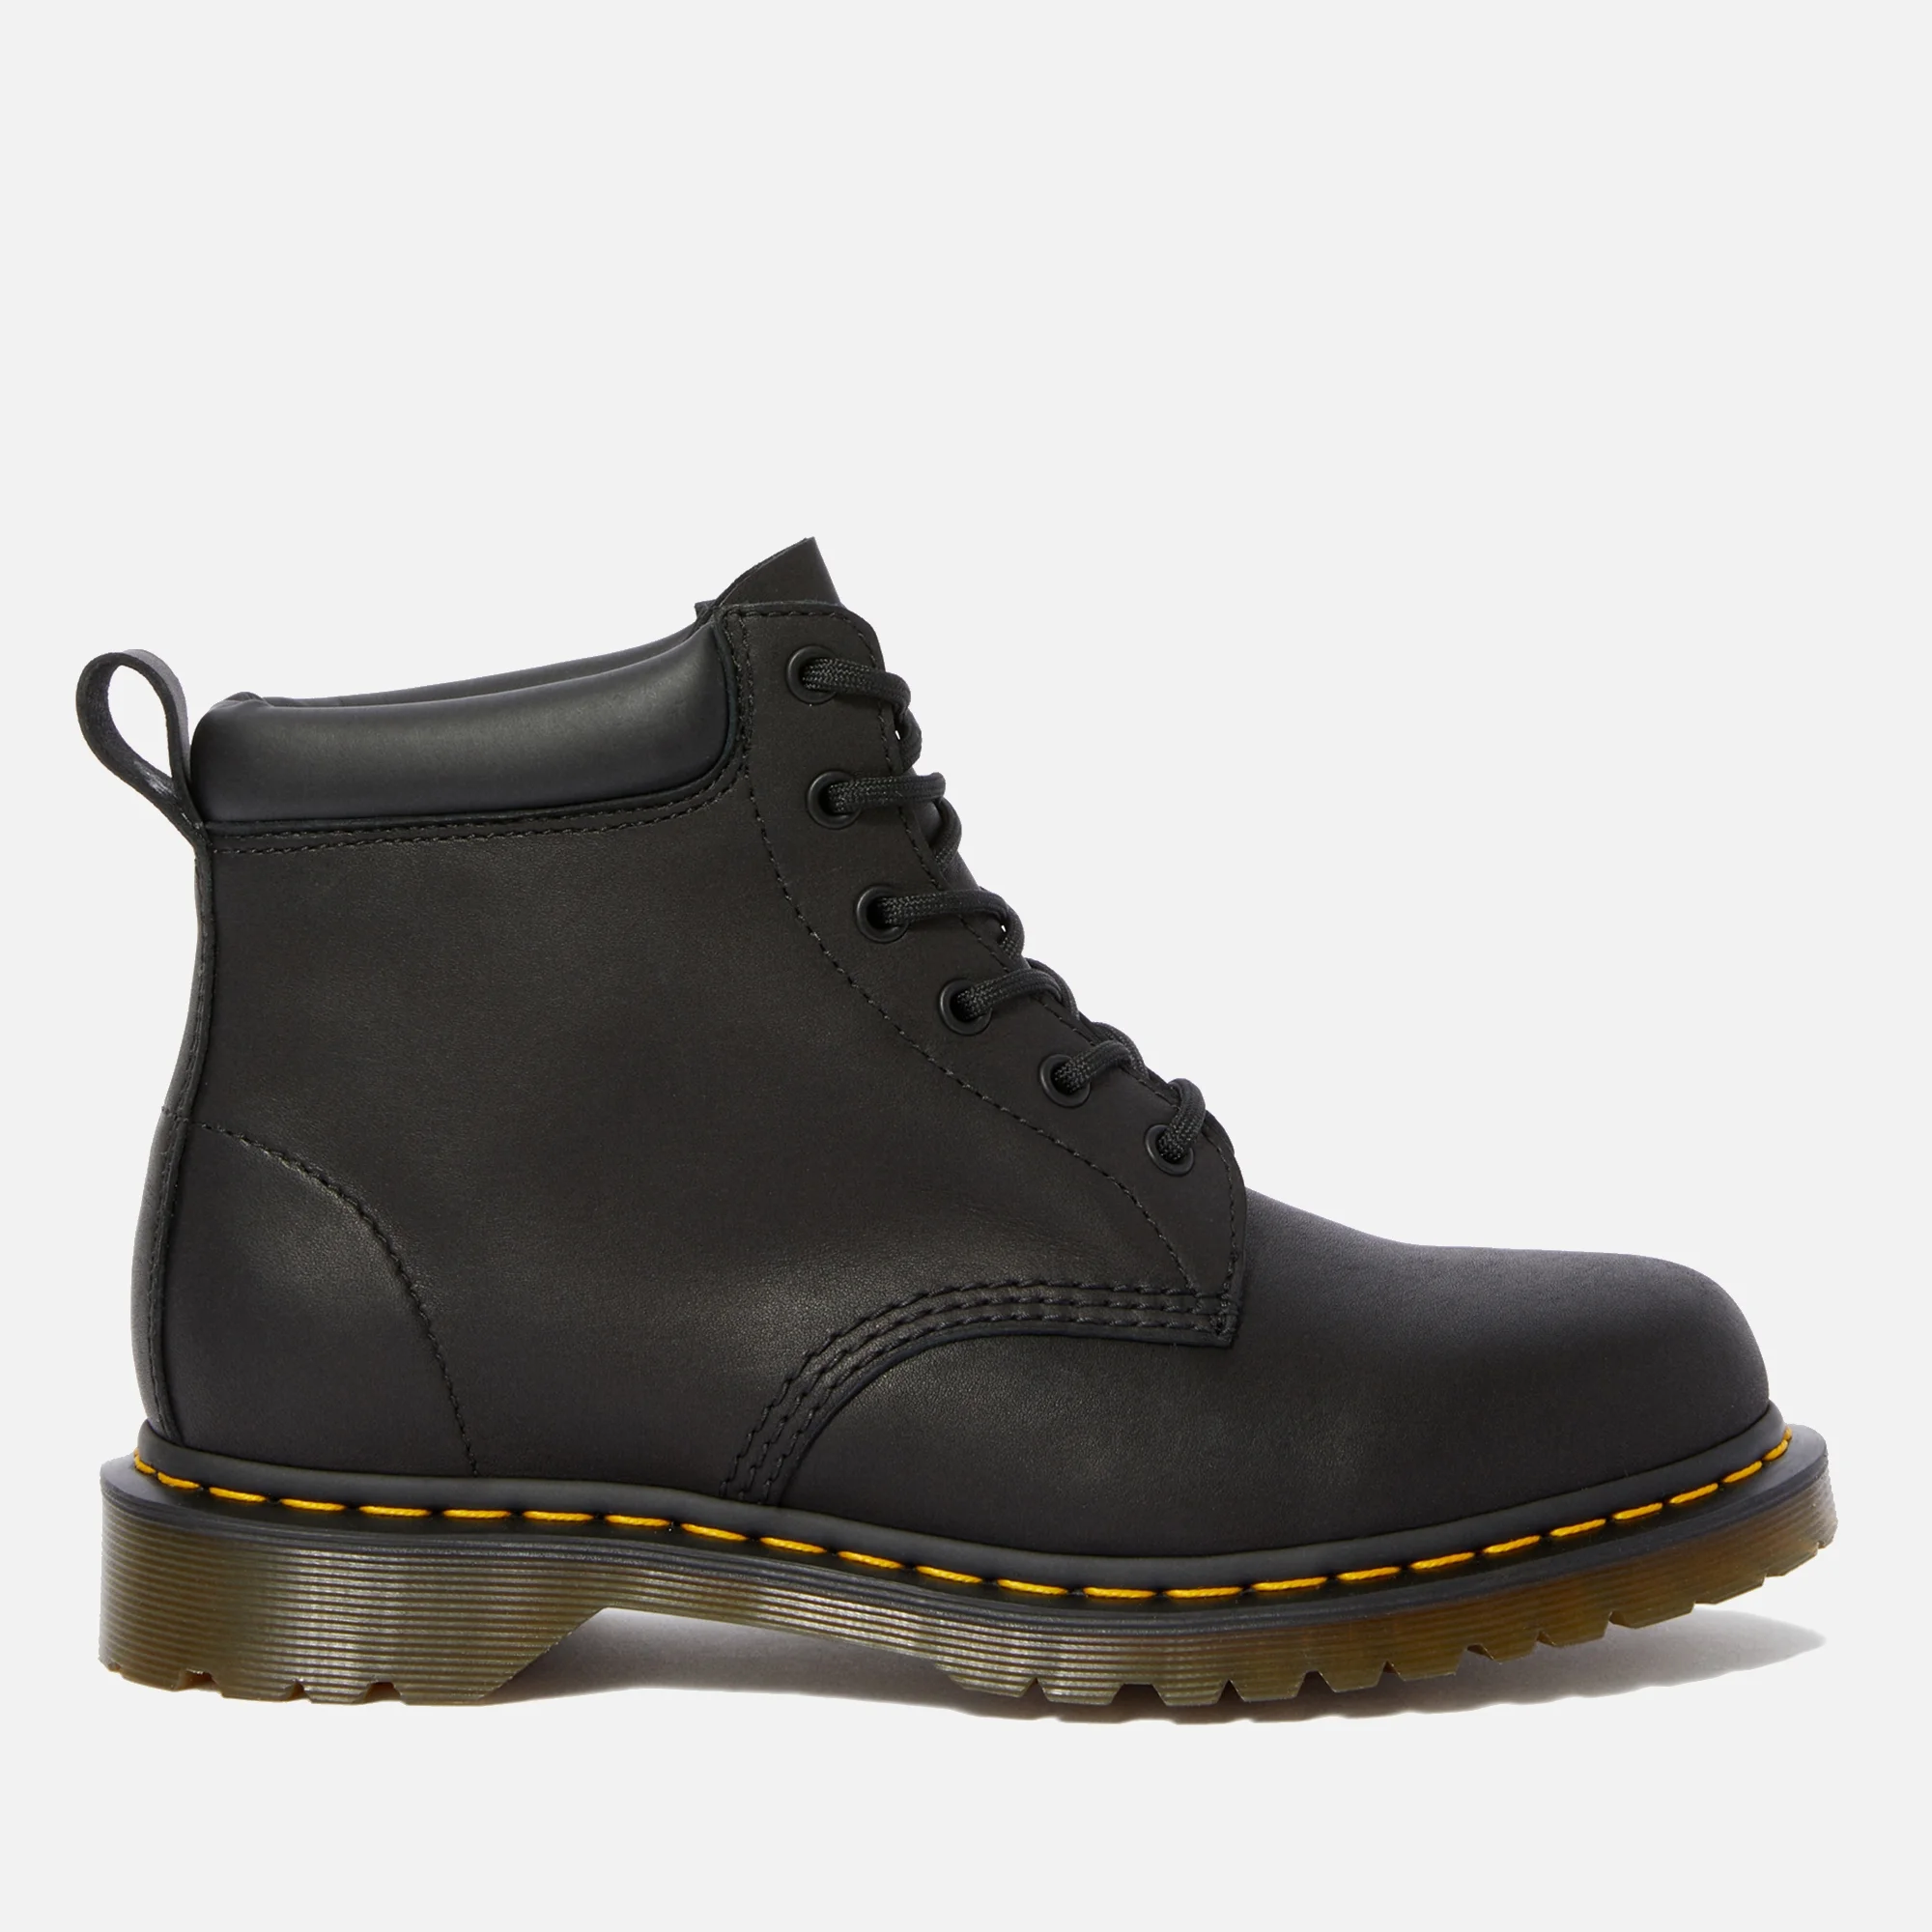 Dr. Martens 939 Leather 6-Eye Boots Image 1